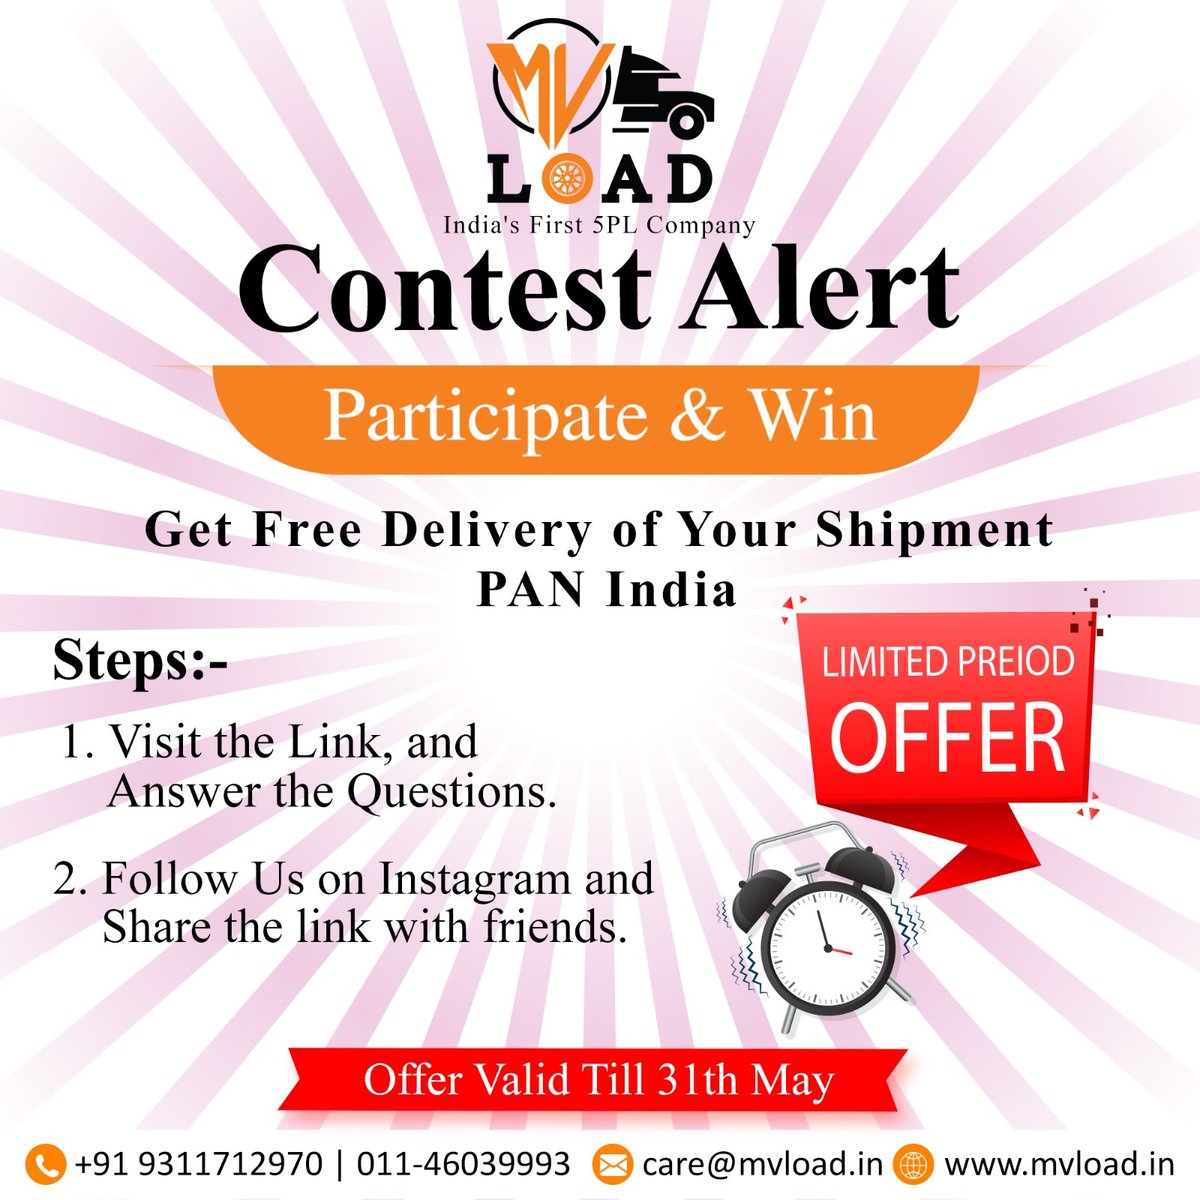 𝐏𝐚𝐫𝐭𝐢𝐜𝐢𝐩𝐚𝐭𝐞 𝐚𝐧𝐝 𝐖𝐢𝐧! Amazing contest! Follow the steps below to get free delivery of your shipment PAN India!! Here's the referral link: bit.ly/3lfOft4 #contest #offer #win #alert #mvload #logistics #contestindia #delivery #india #freeShipping